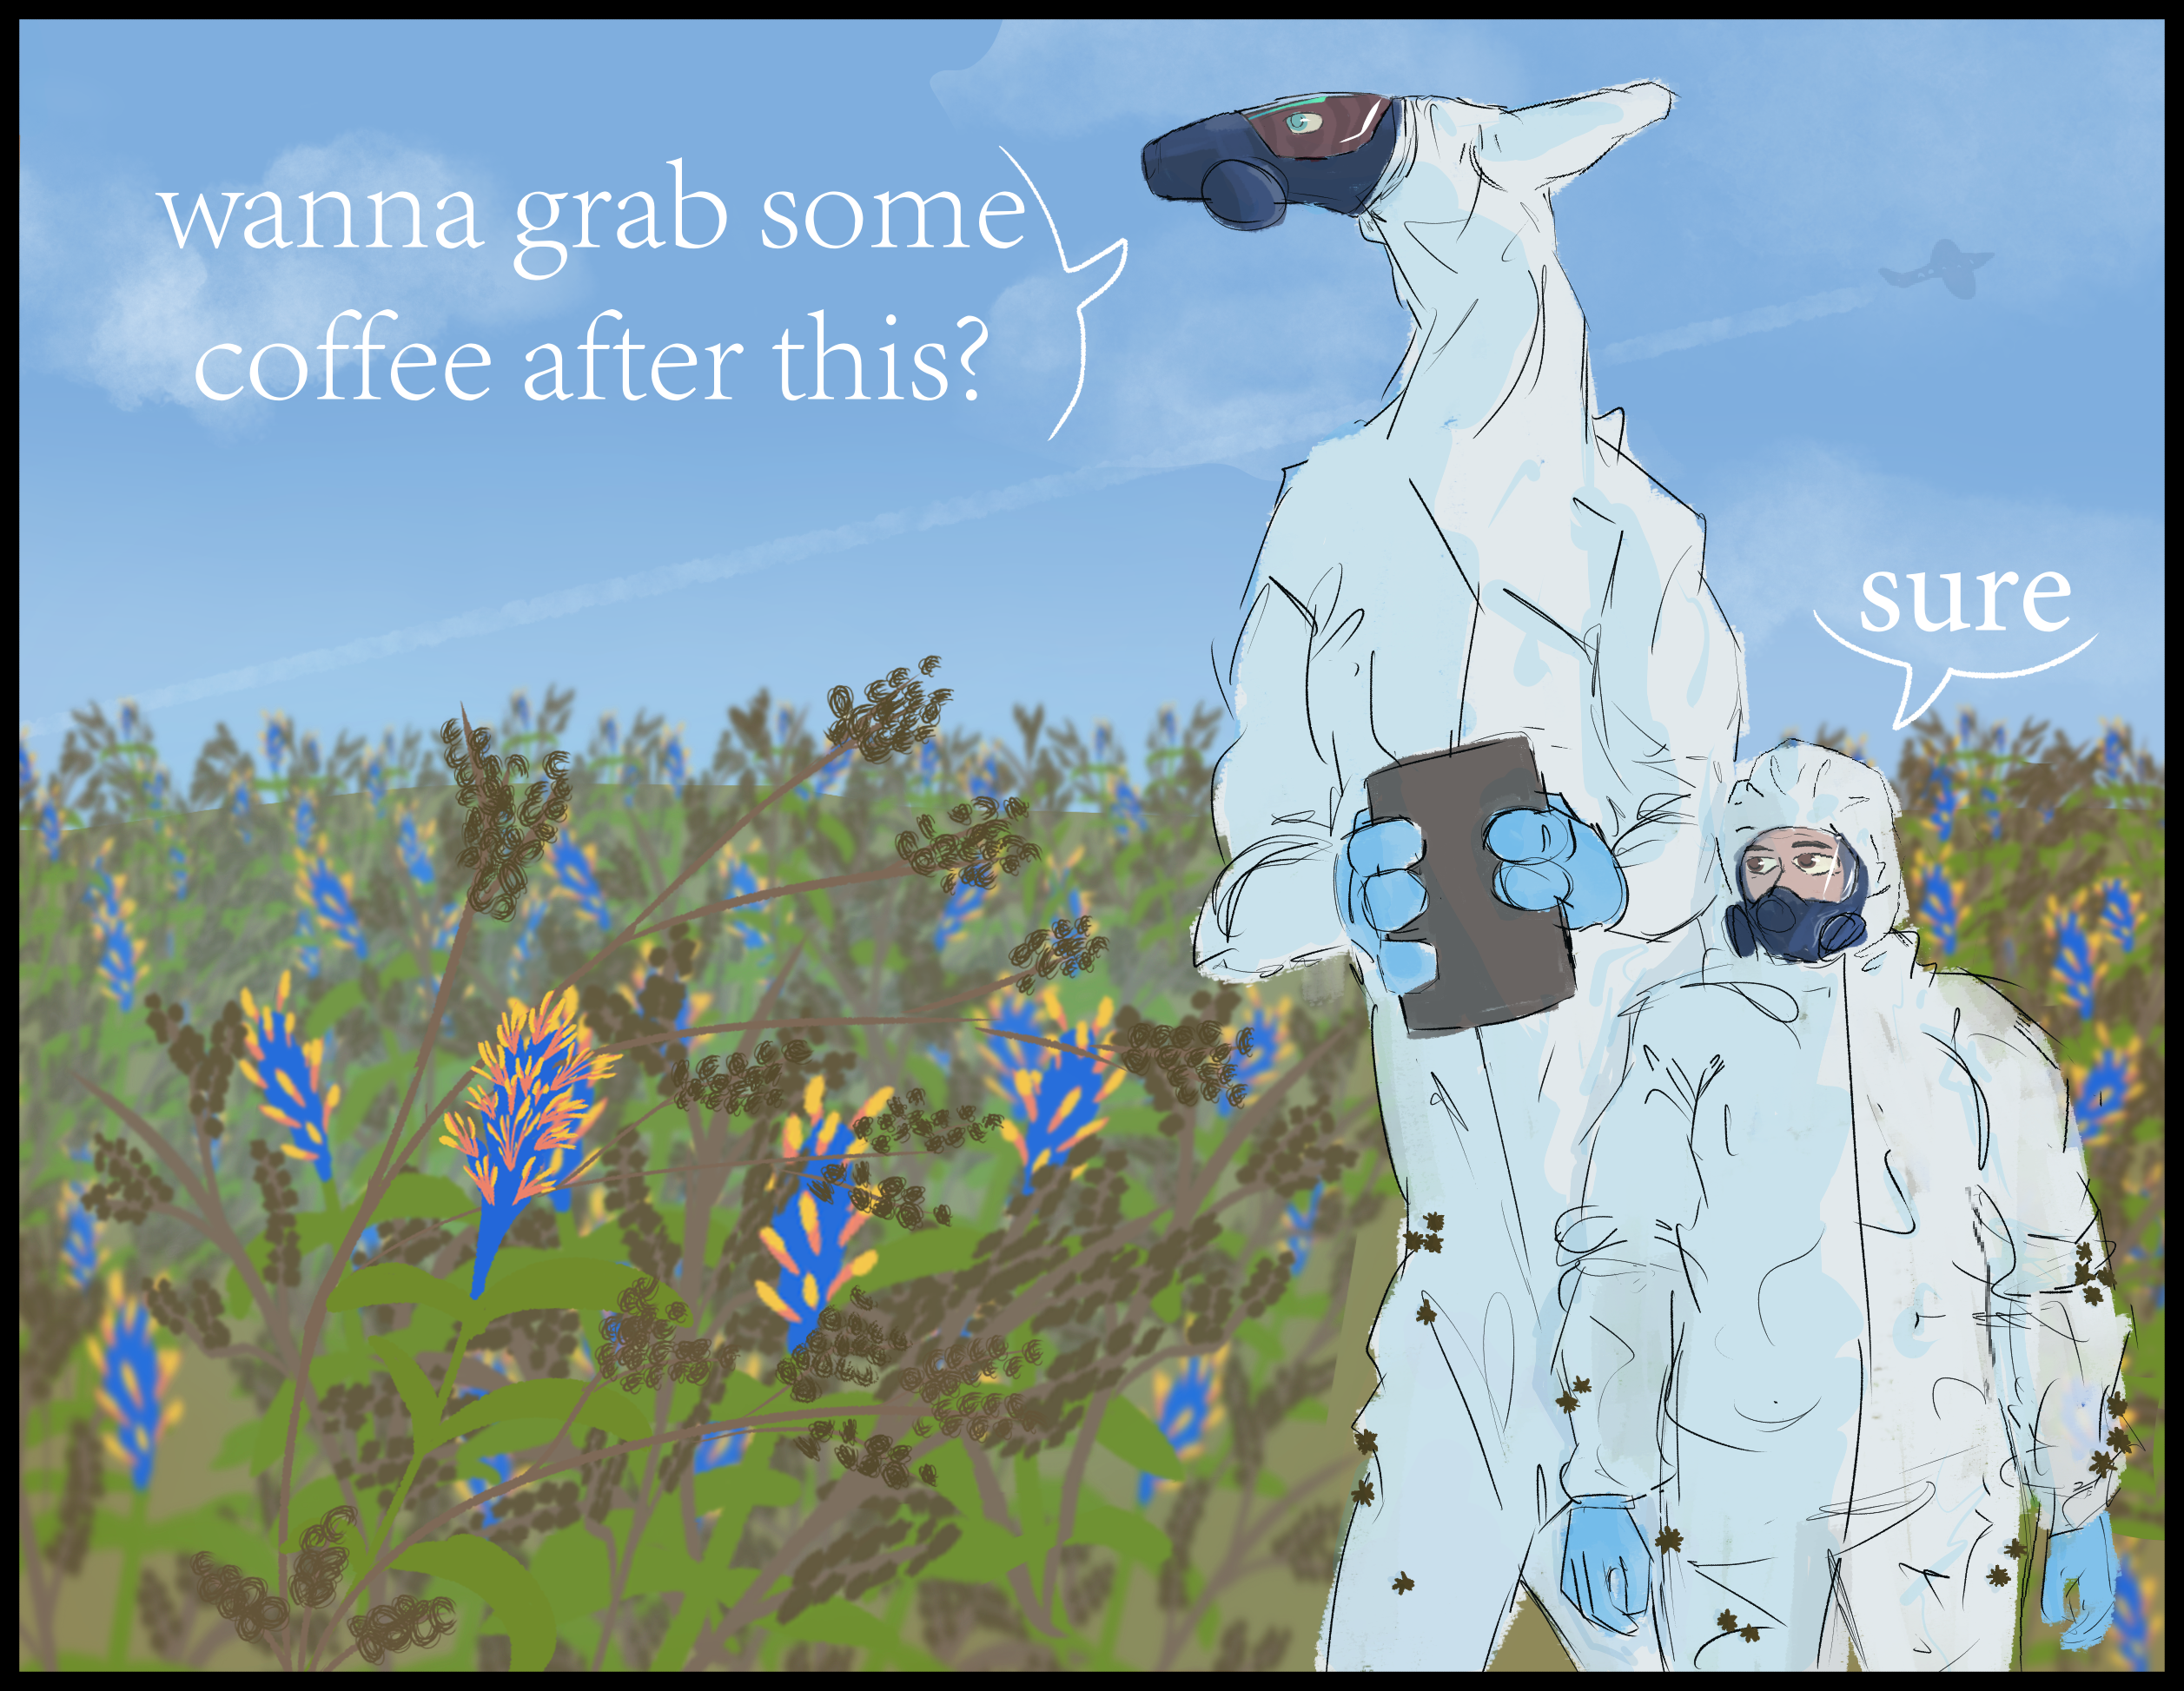 A human and a hex alien in hazmat suits standing in a field of flowers.